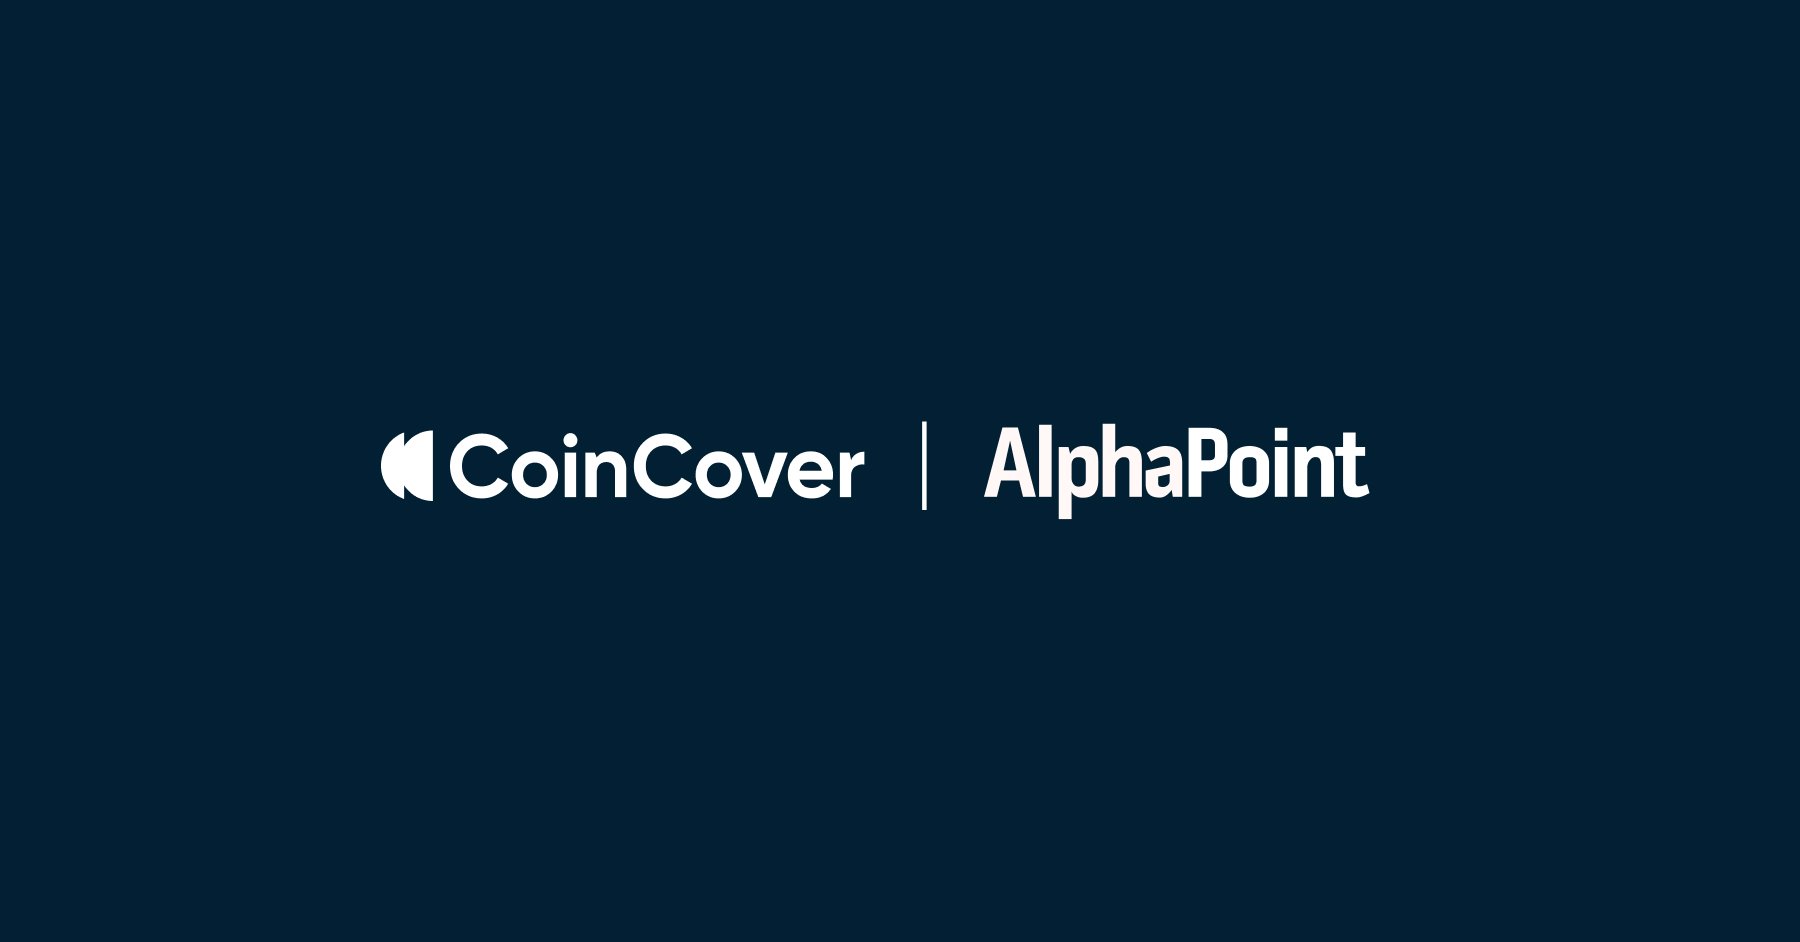 AlphaPoint partners with Coincover to boost customer protections